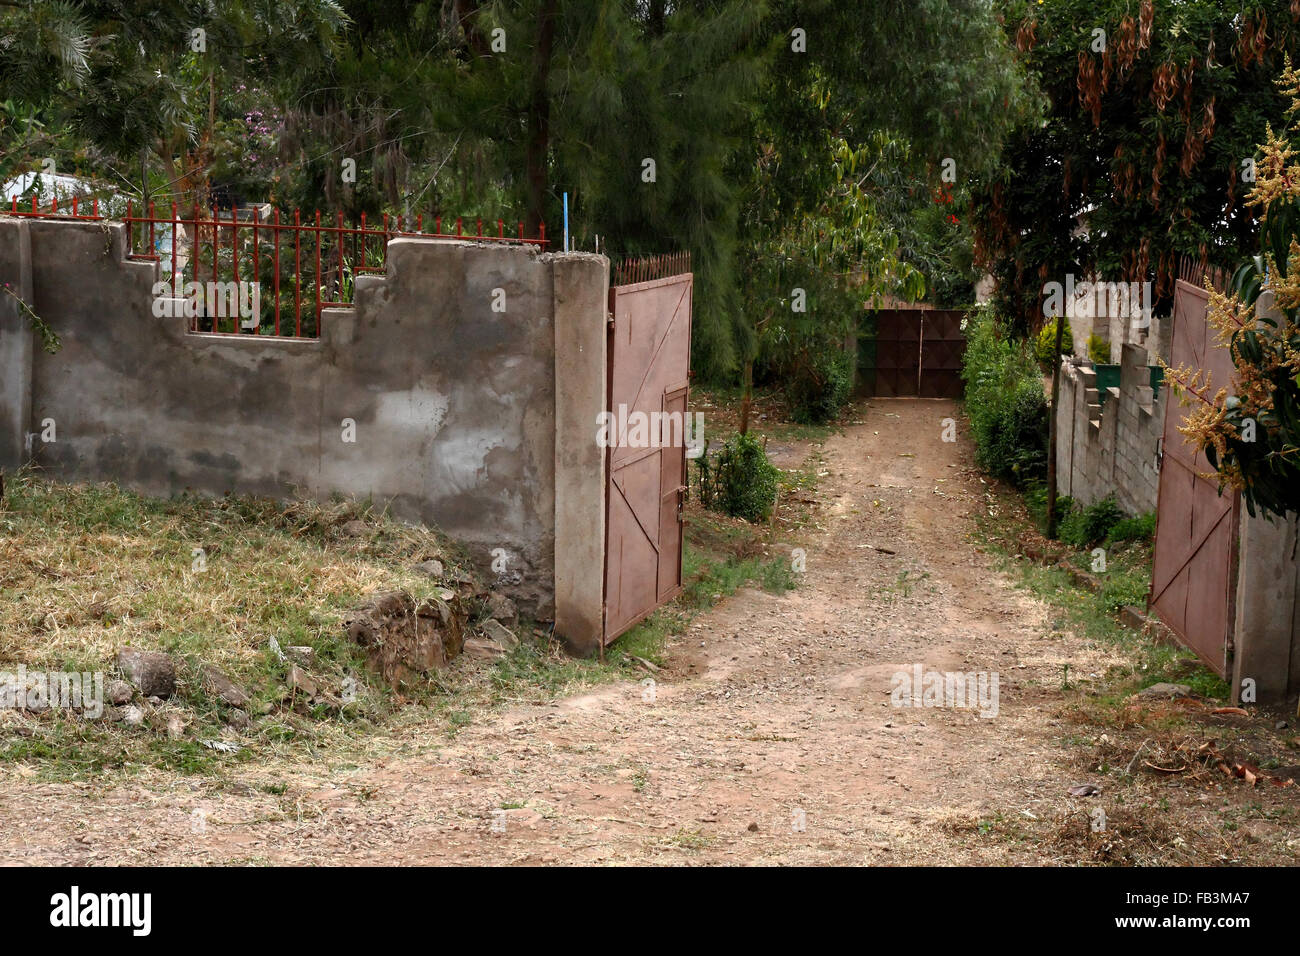 Looking down a path through a walled compound with two solid metal gates Stock Photo